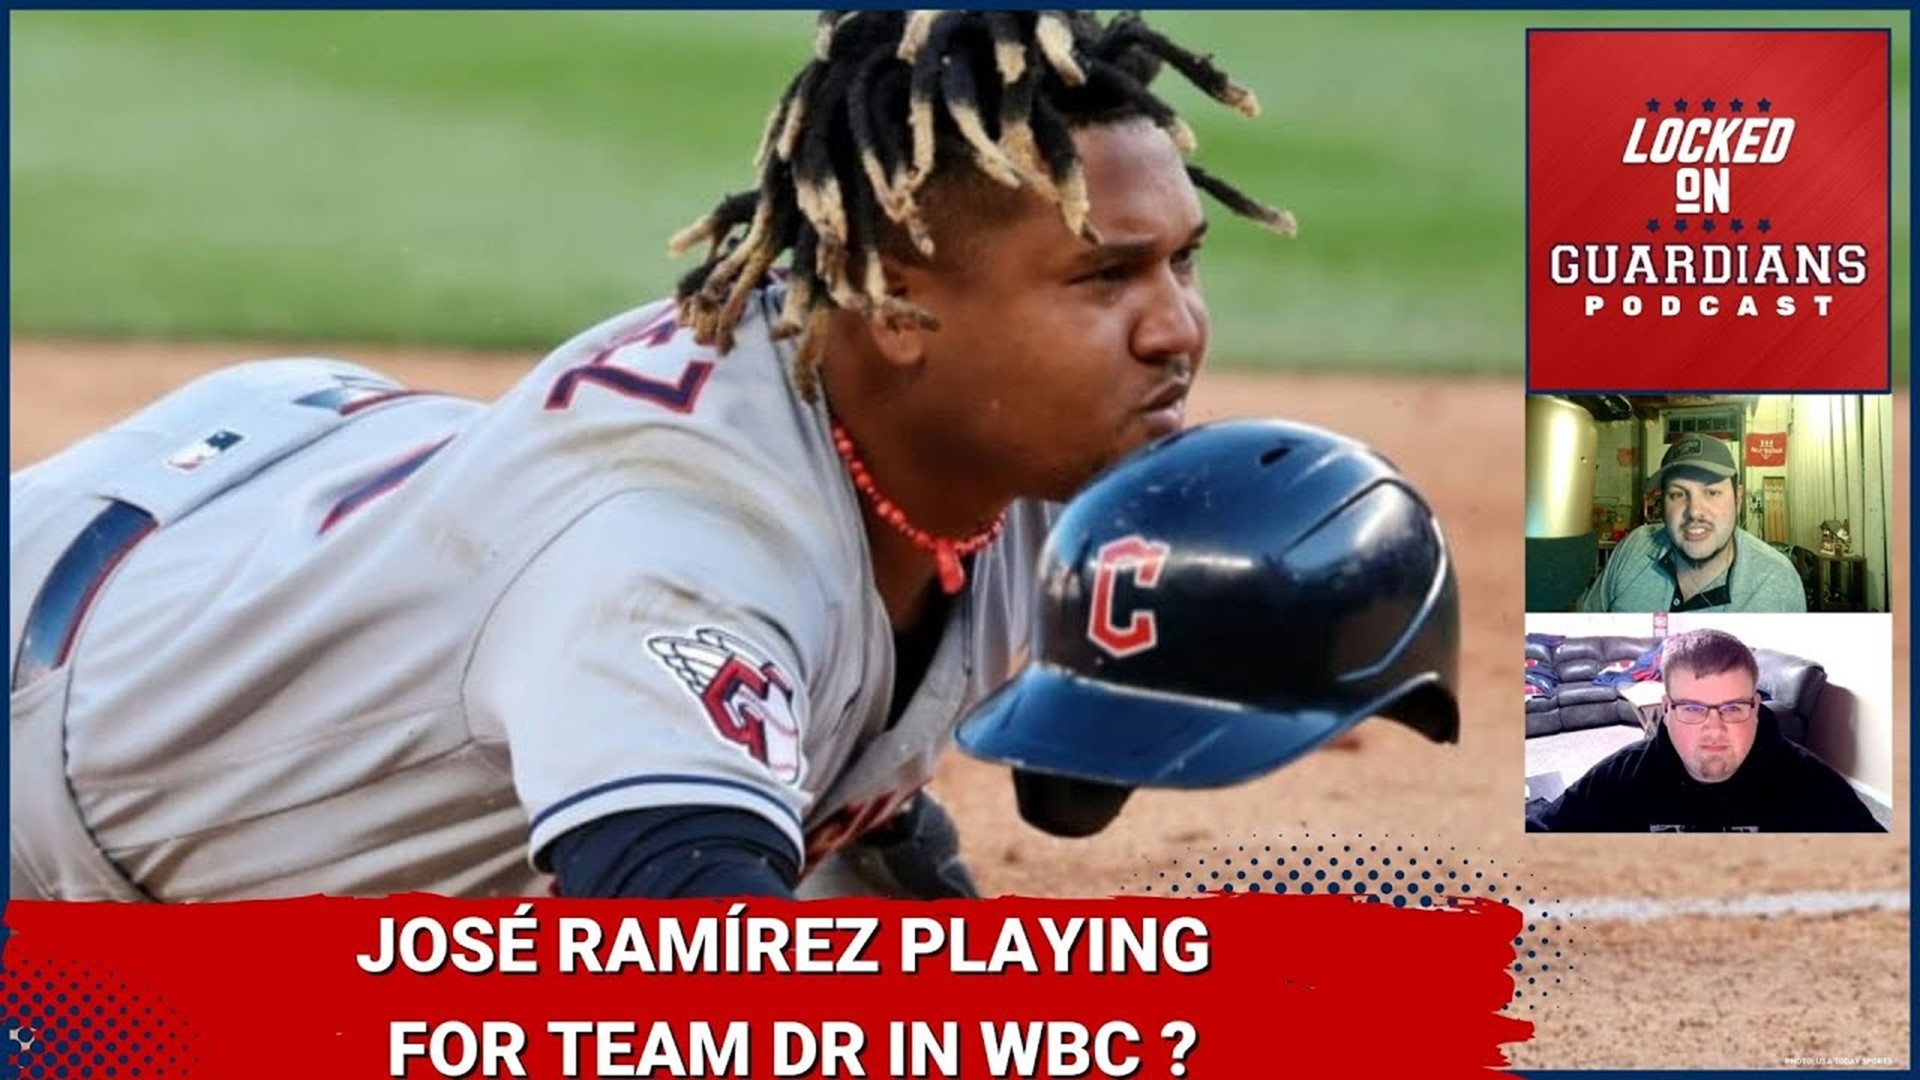 An unconfirmed report says that José Ramírez could be playing for the Dominican Republic in the World Baseball Classic next month.